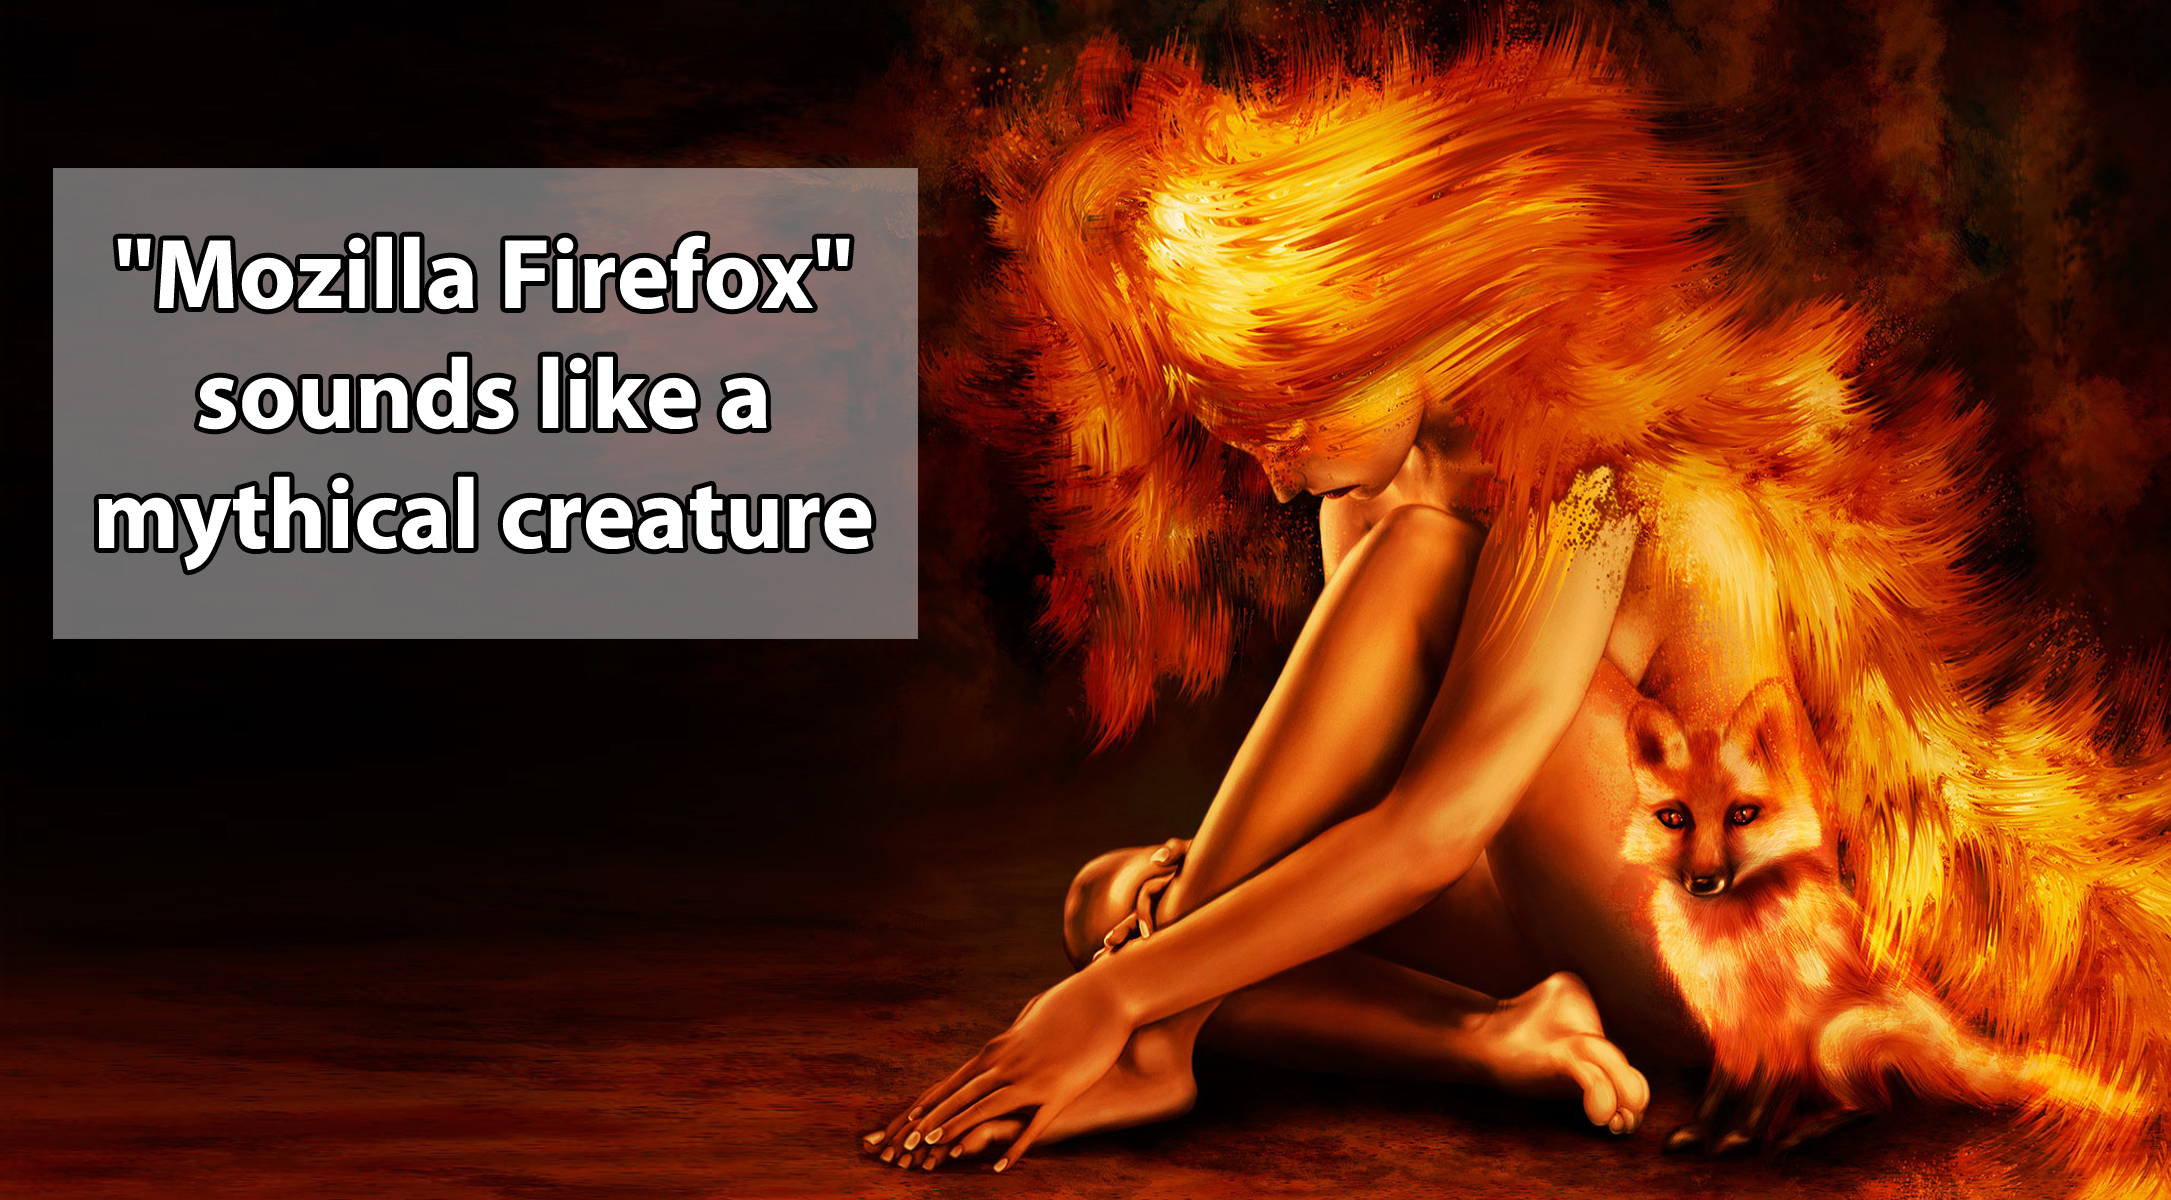 fantasy fire woman - "Mozilla Firefox" sounds a mythical creature